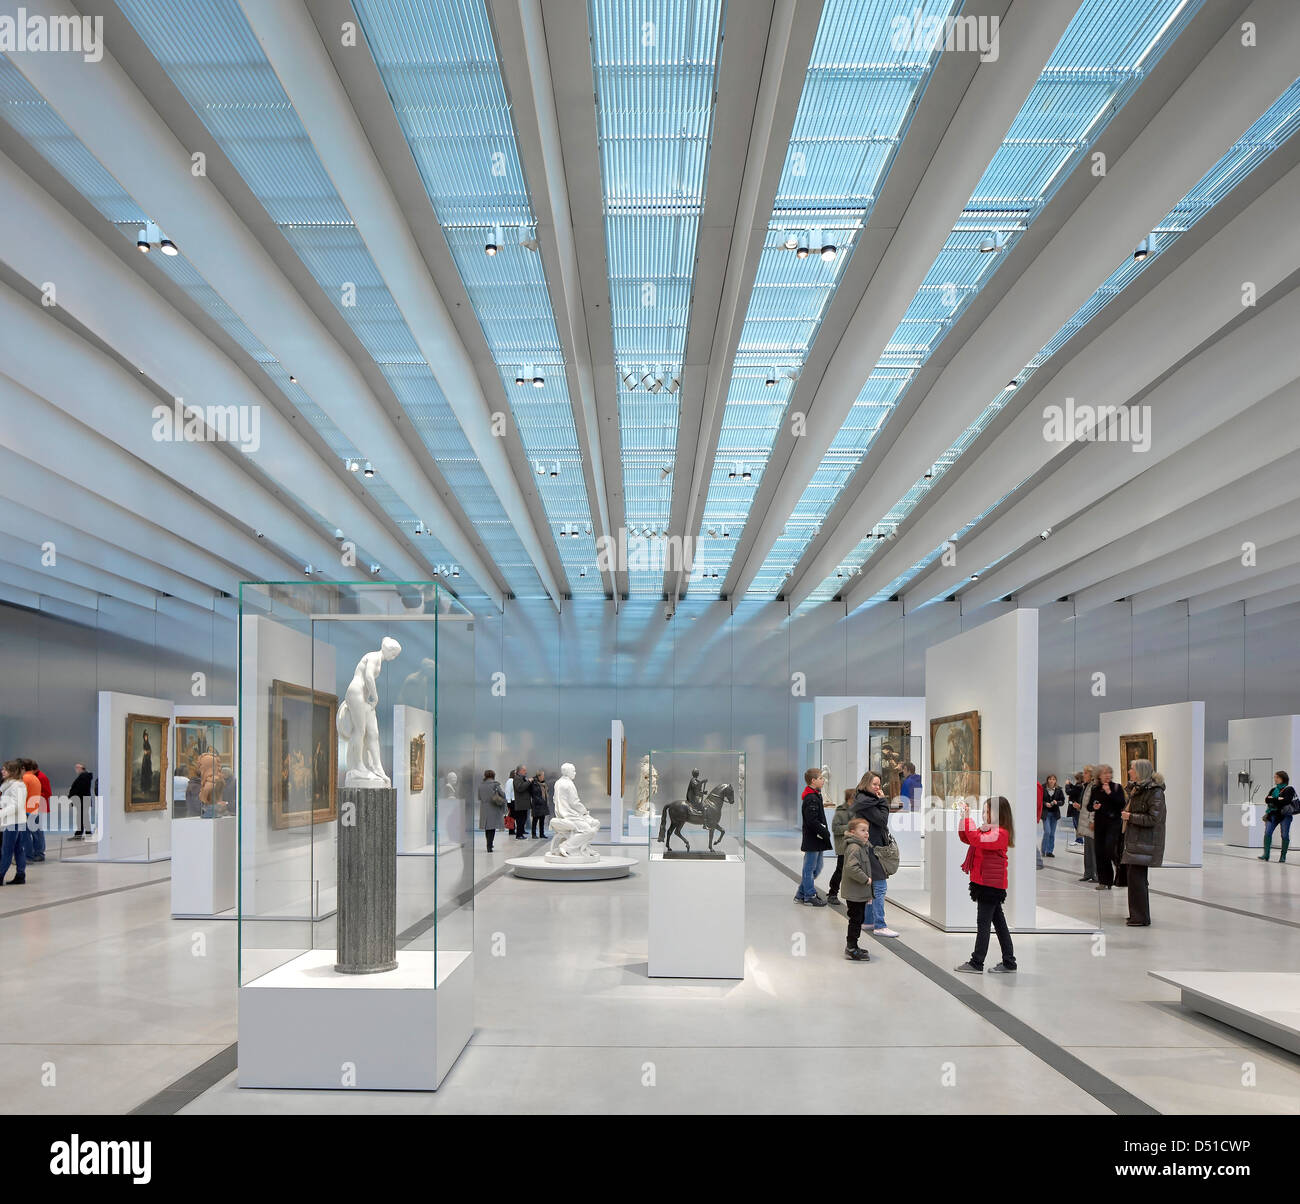 Geef energie Vermaken eenvoudig Musée Du Louvre Lens, Lens, France. Architect: SANAA, 2012. The permanent  collection hall with glazed roof panels and louvres Stock Photo - Alamy